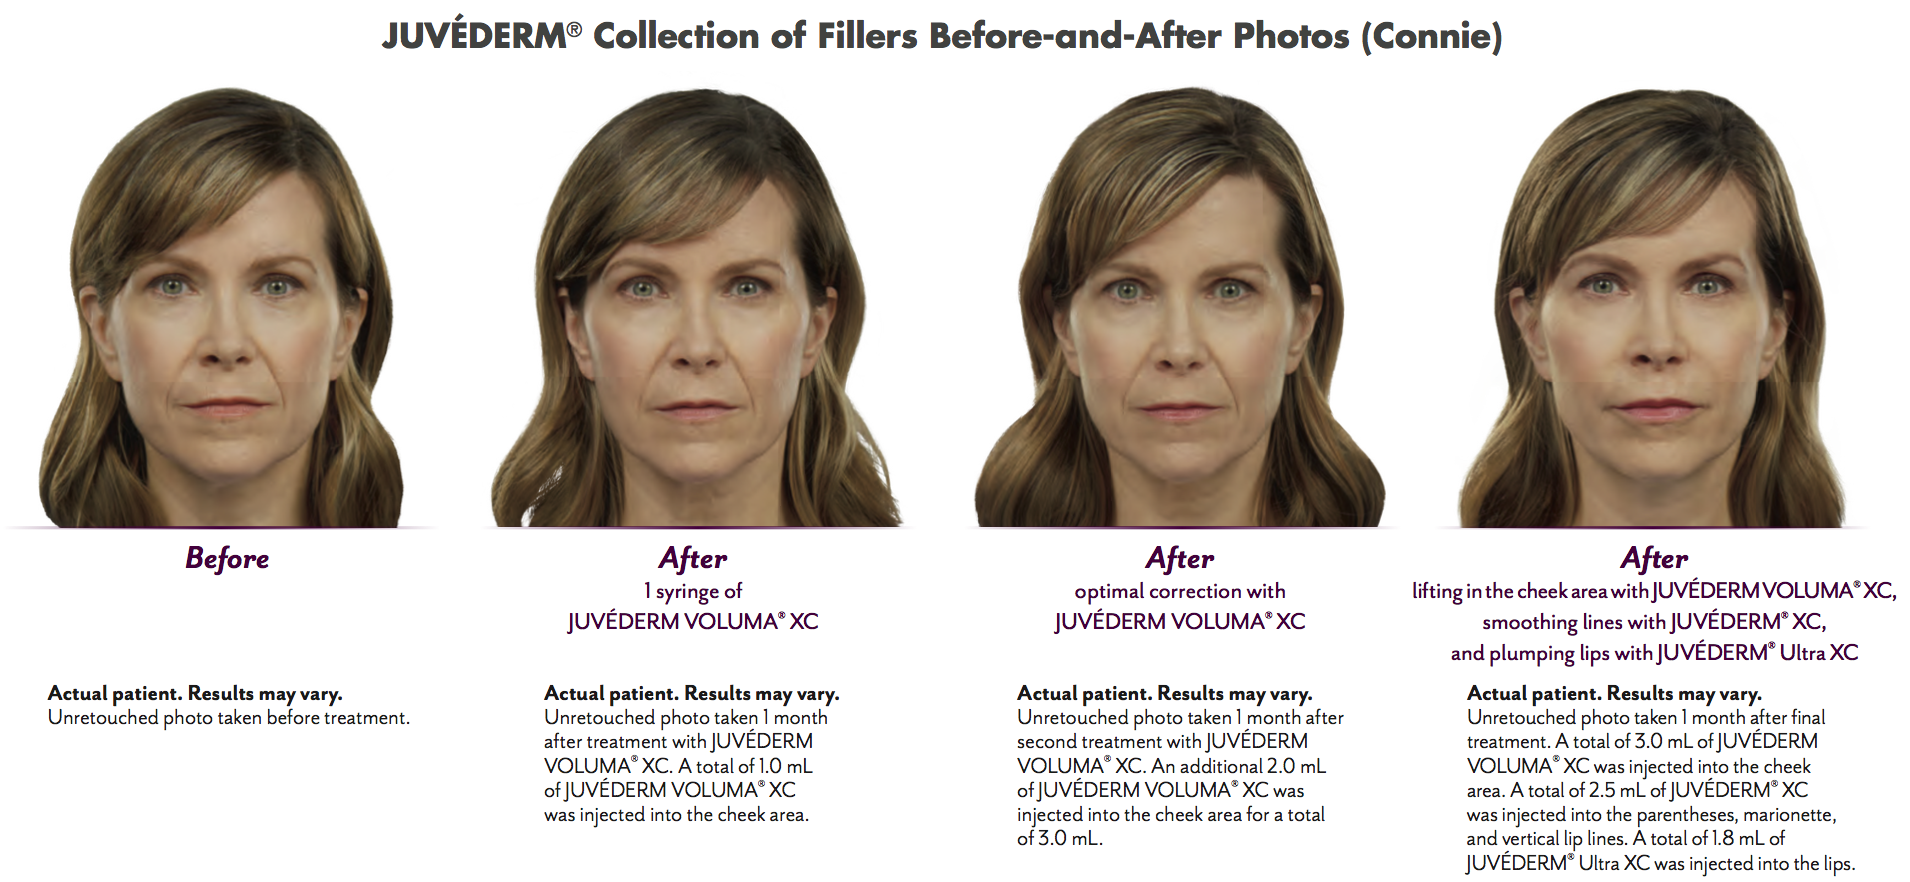 Juvederm Before and After Photos 